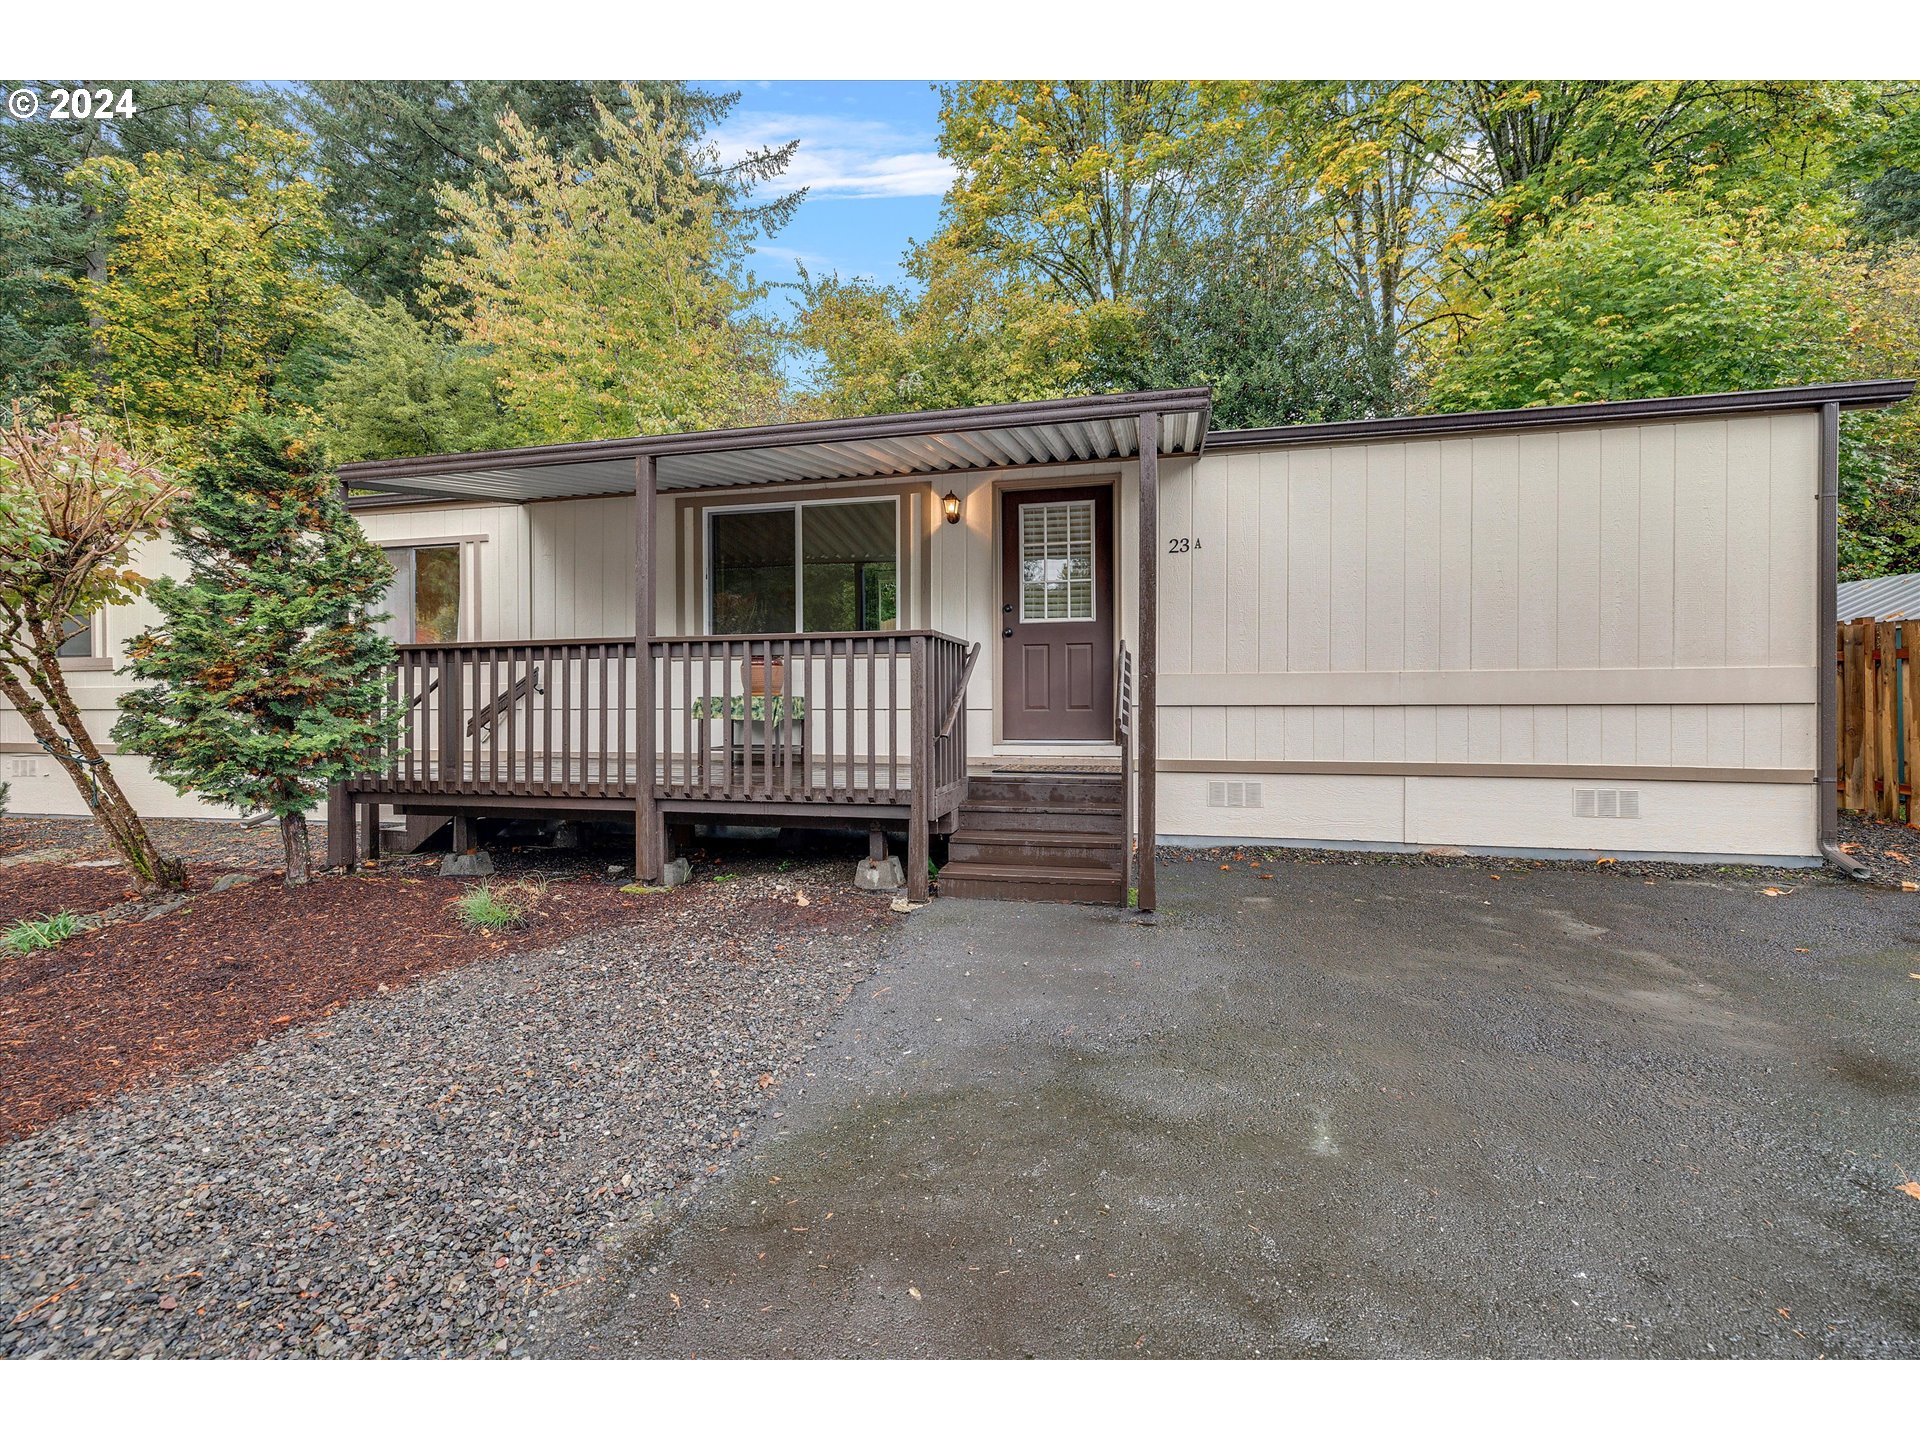 8750 SE 155TH AVE 23A, Happy Valley, OR 